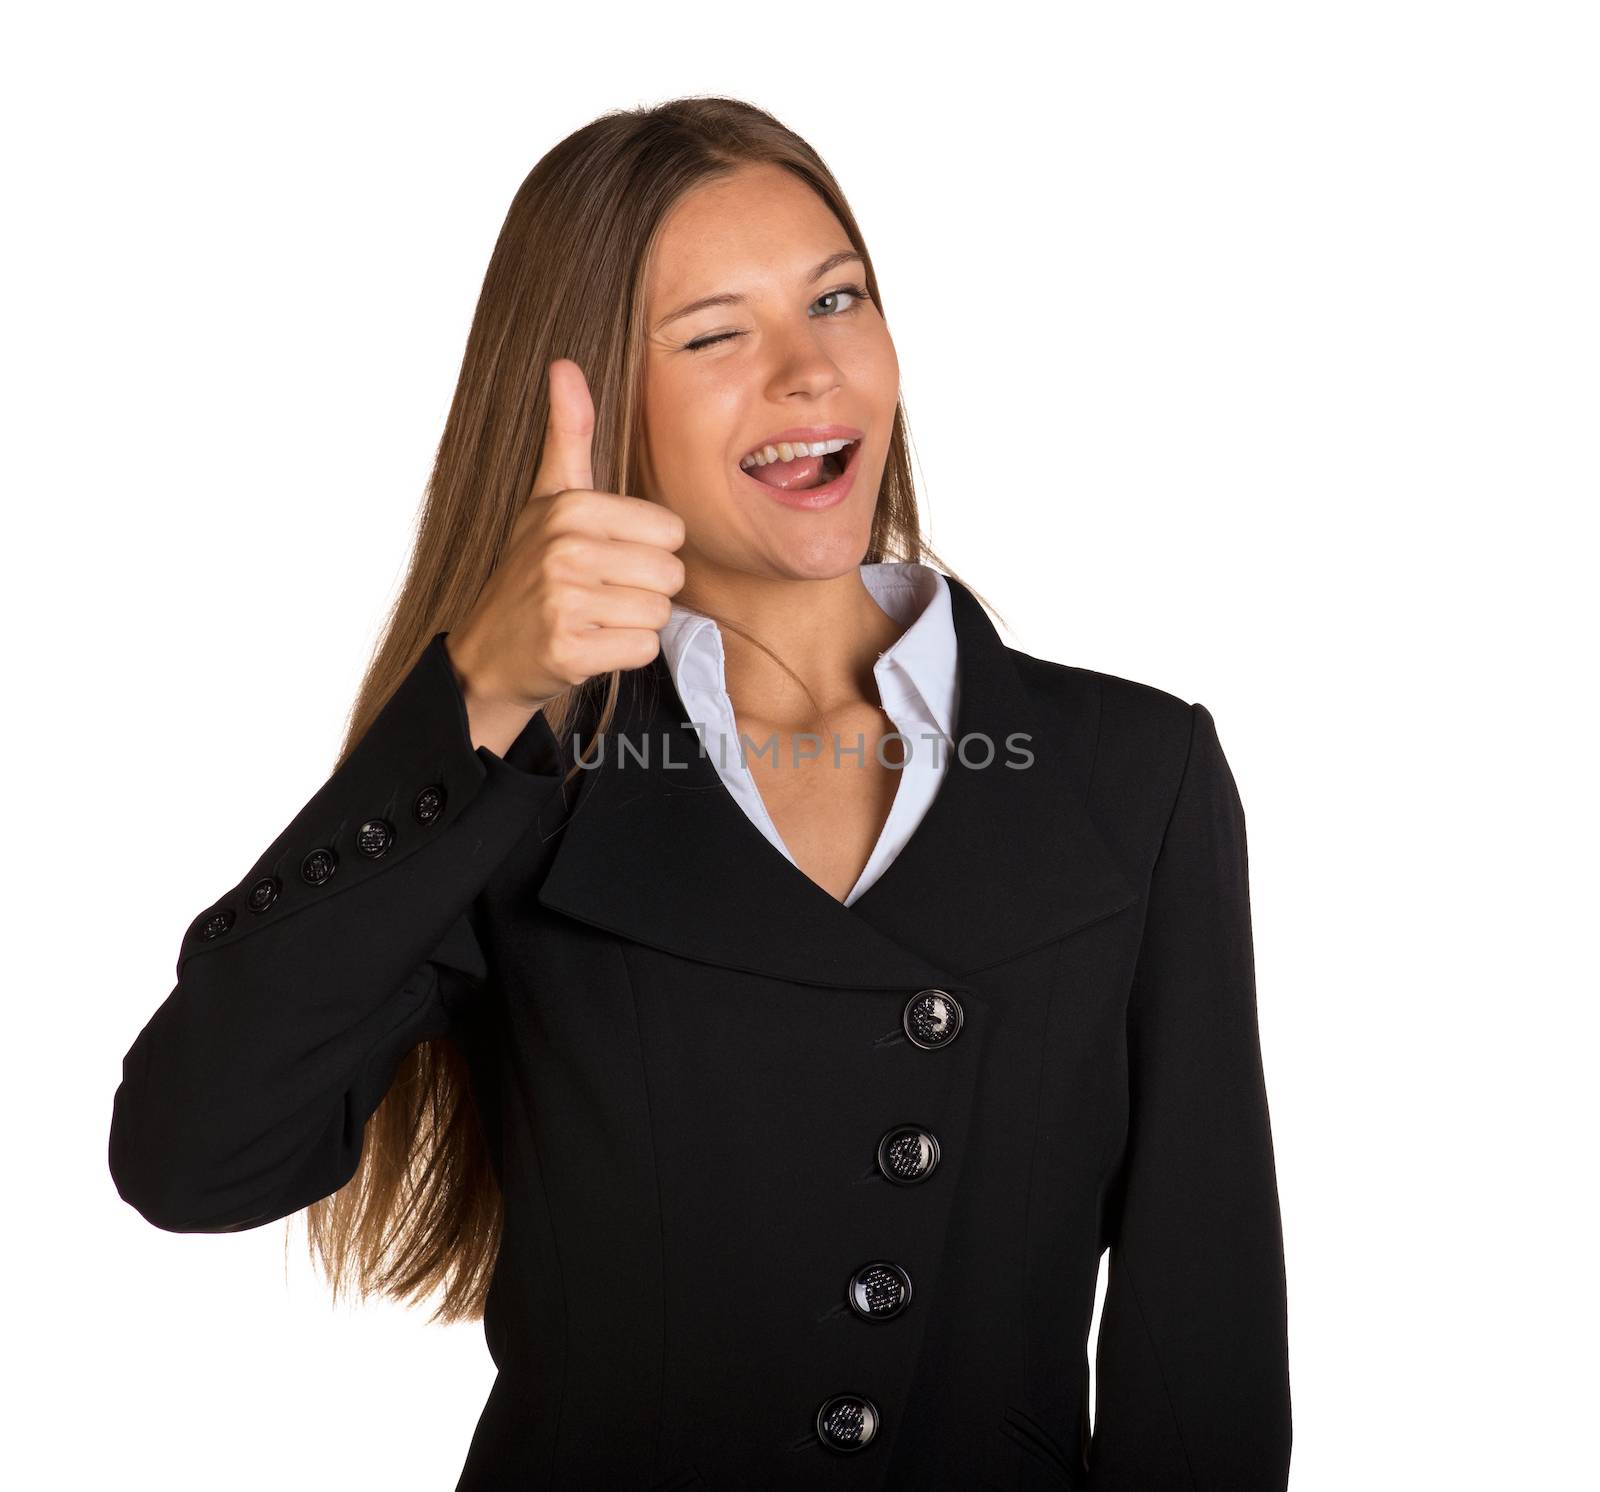 Businesswoman showing thumb up. Isolated on white background